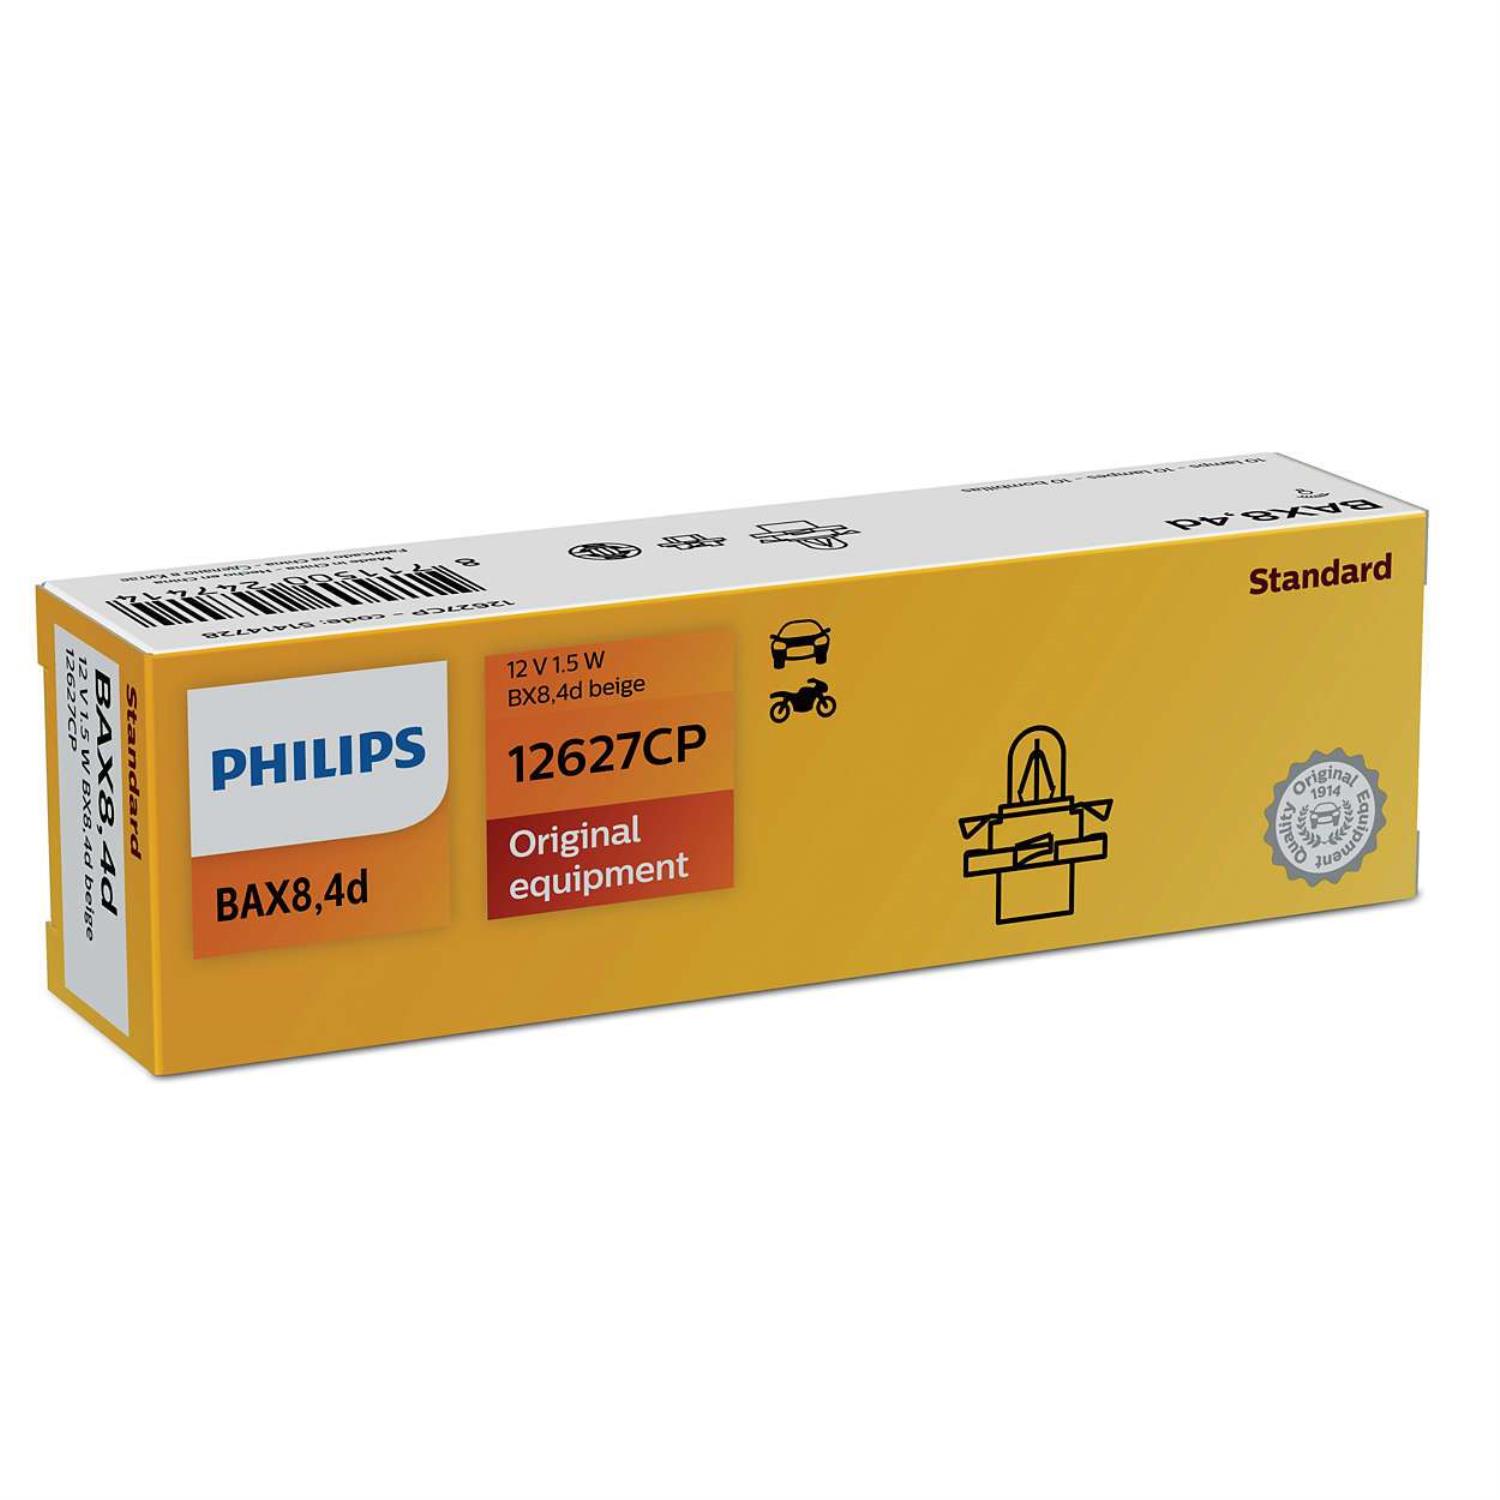 PHILIPS 12637CP Glühlampe Beleuchtung